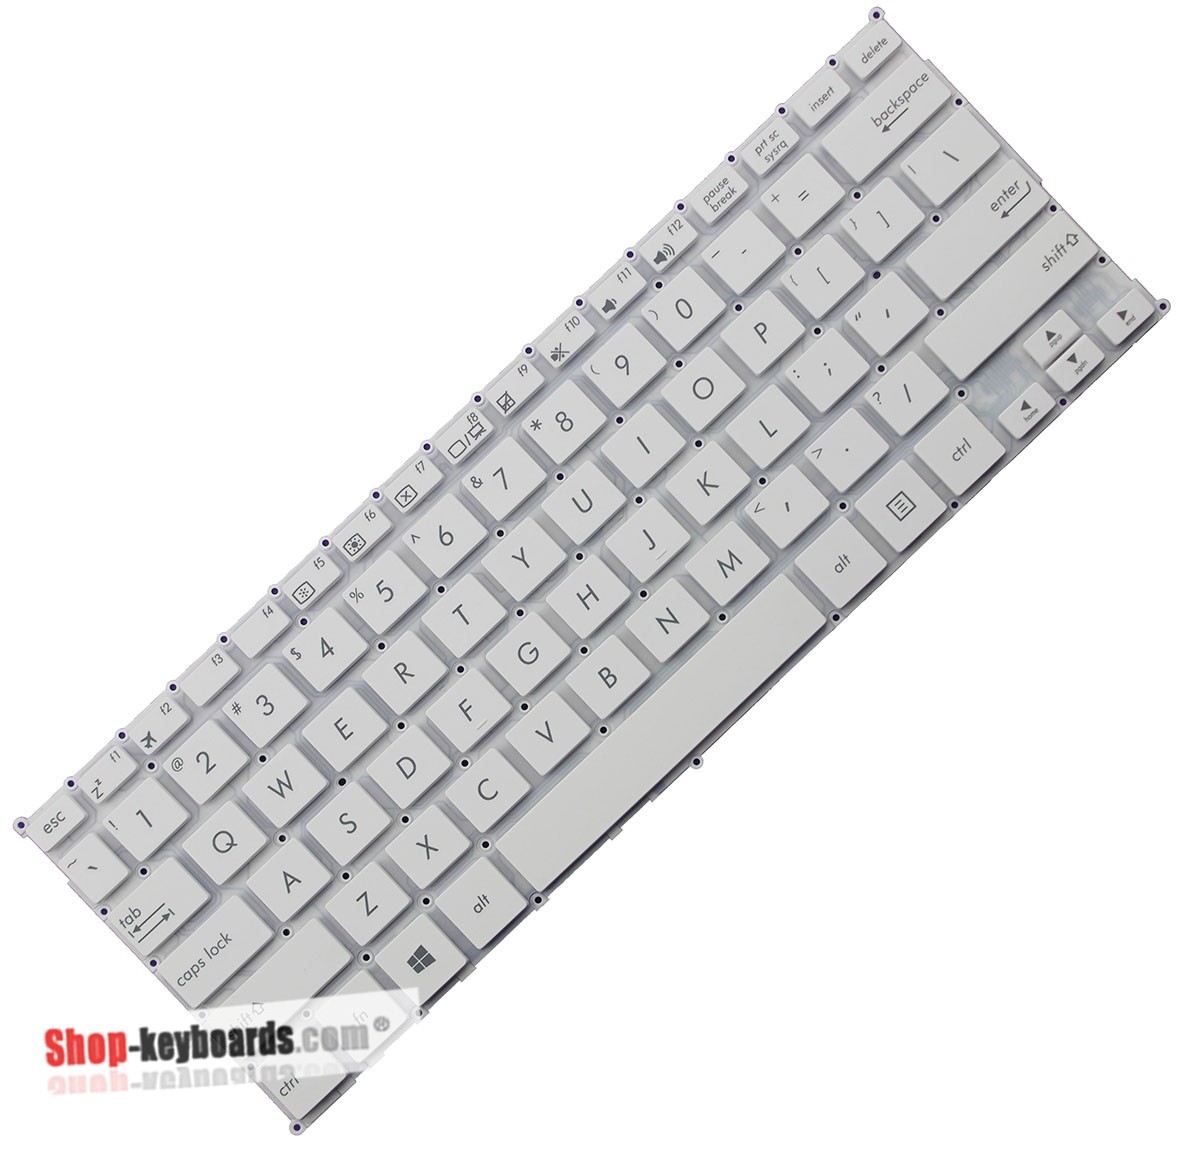 Asus 0KNL0-1100FR00  Keyboard replacement